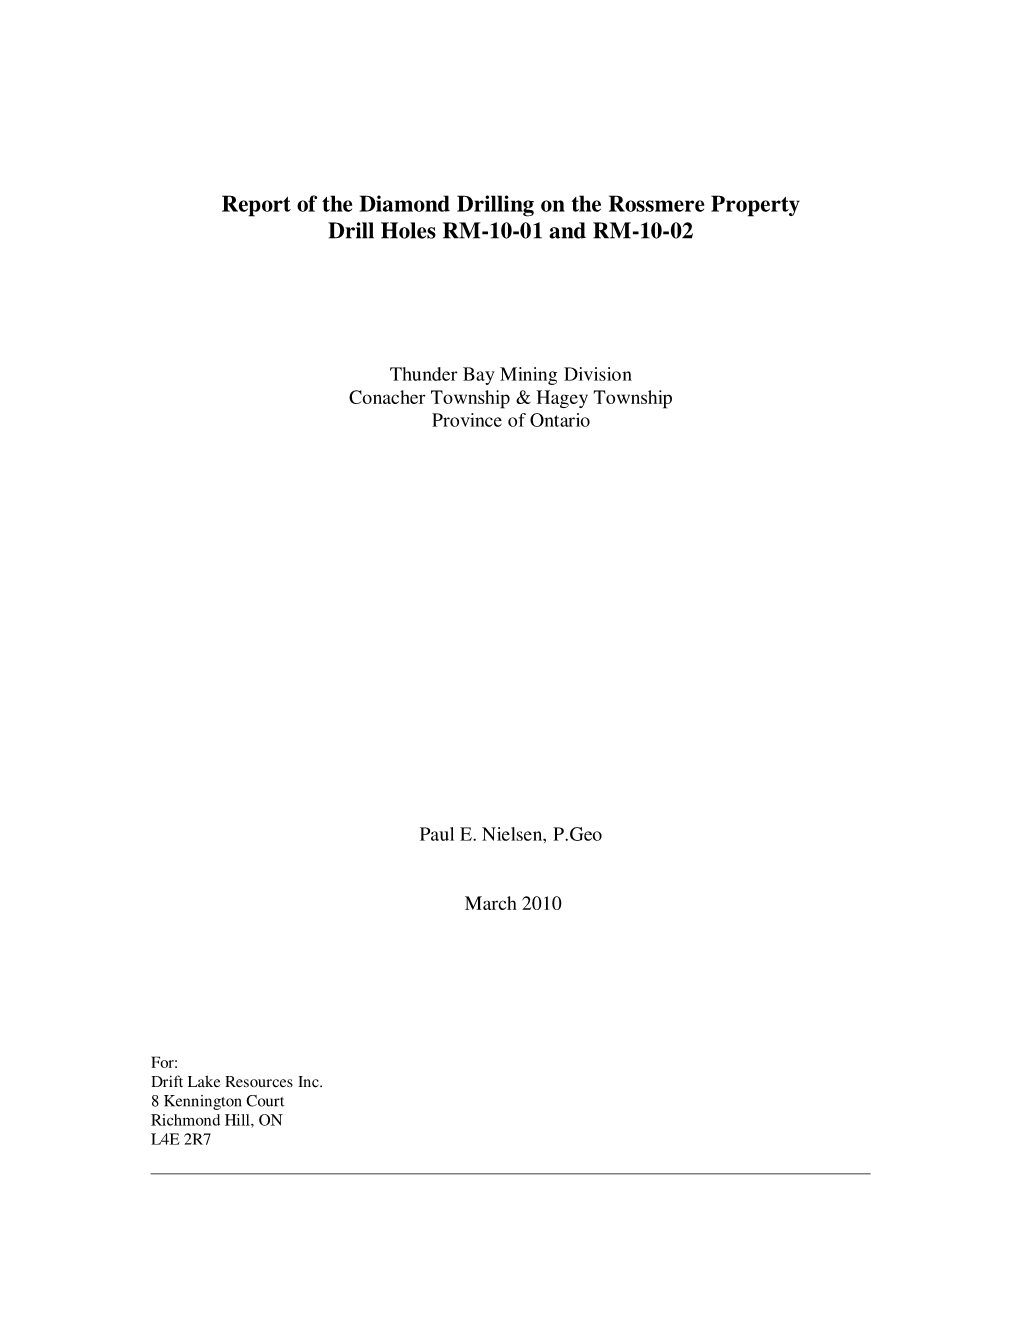 Report of the Diamond Drilling on the Rossmere Property Drill Holes RM-10-01 and RM-10-02